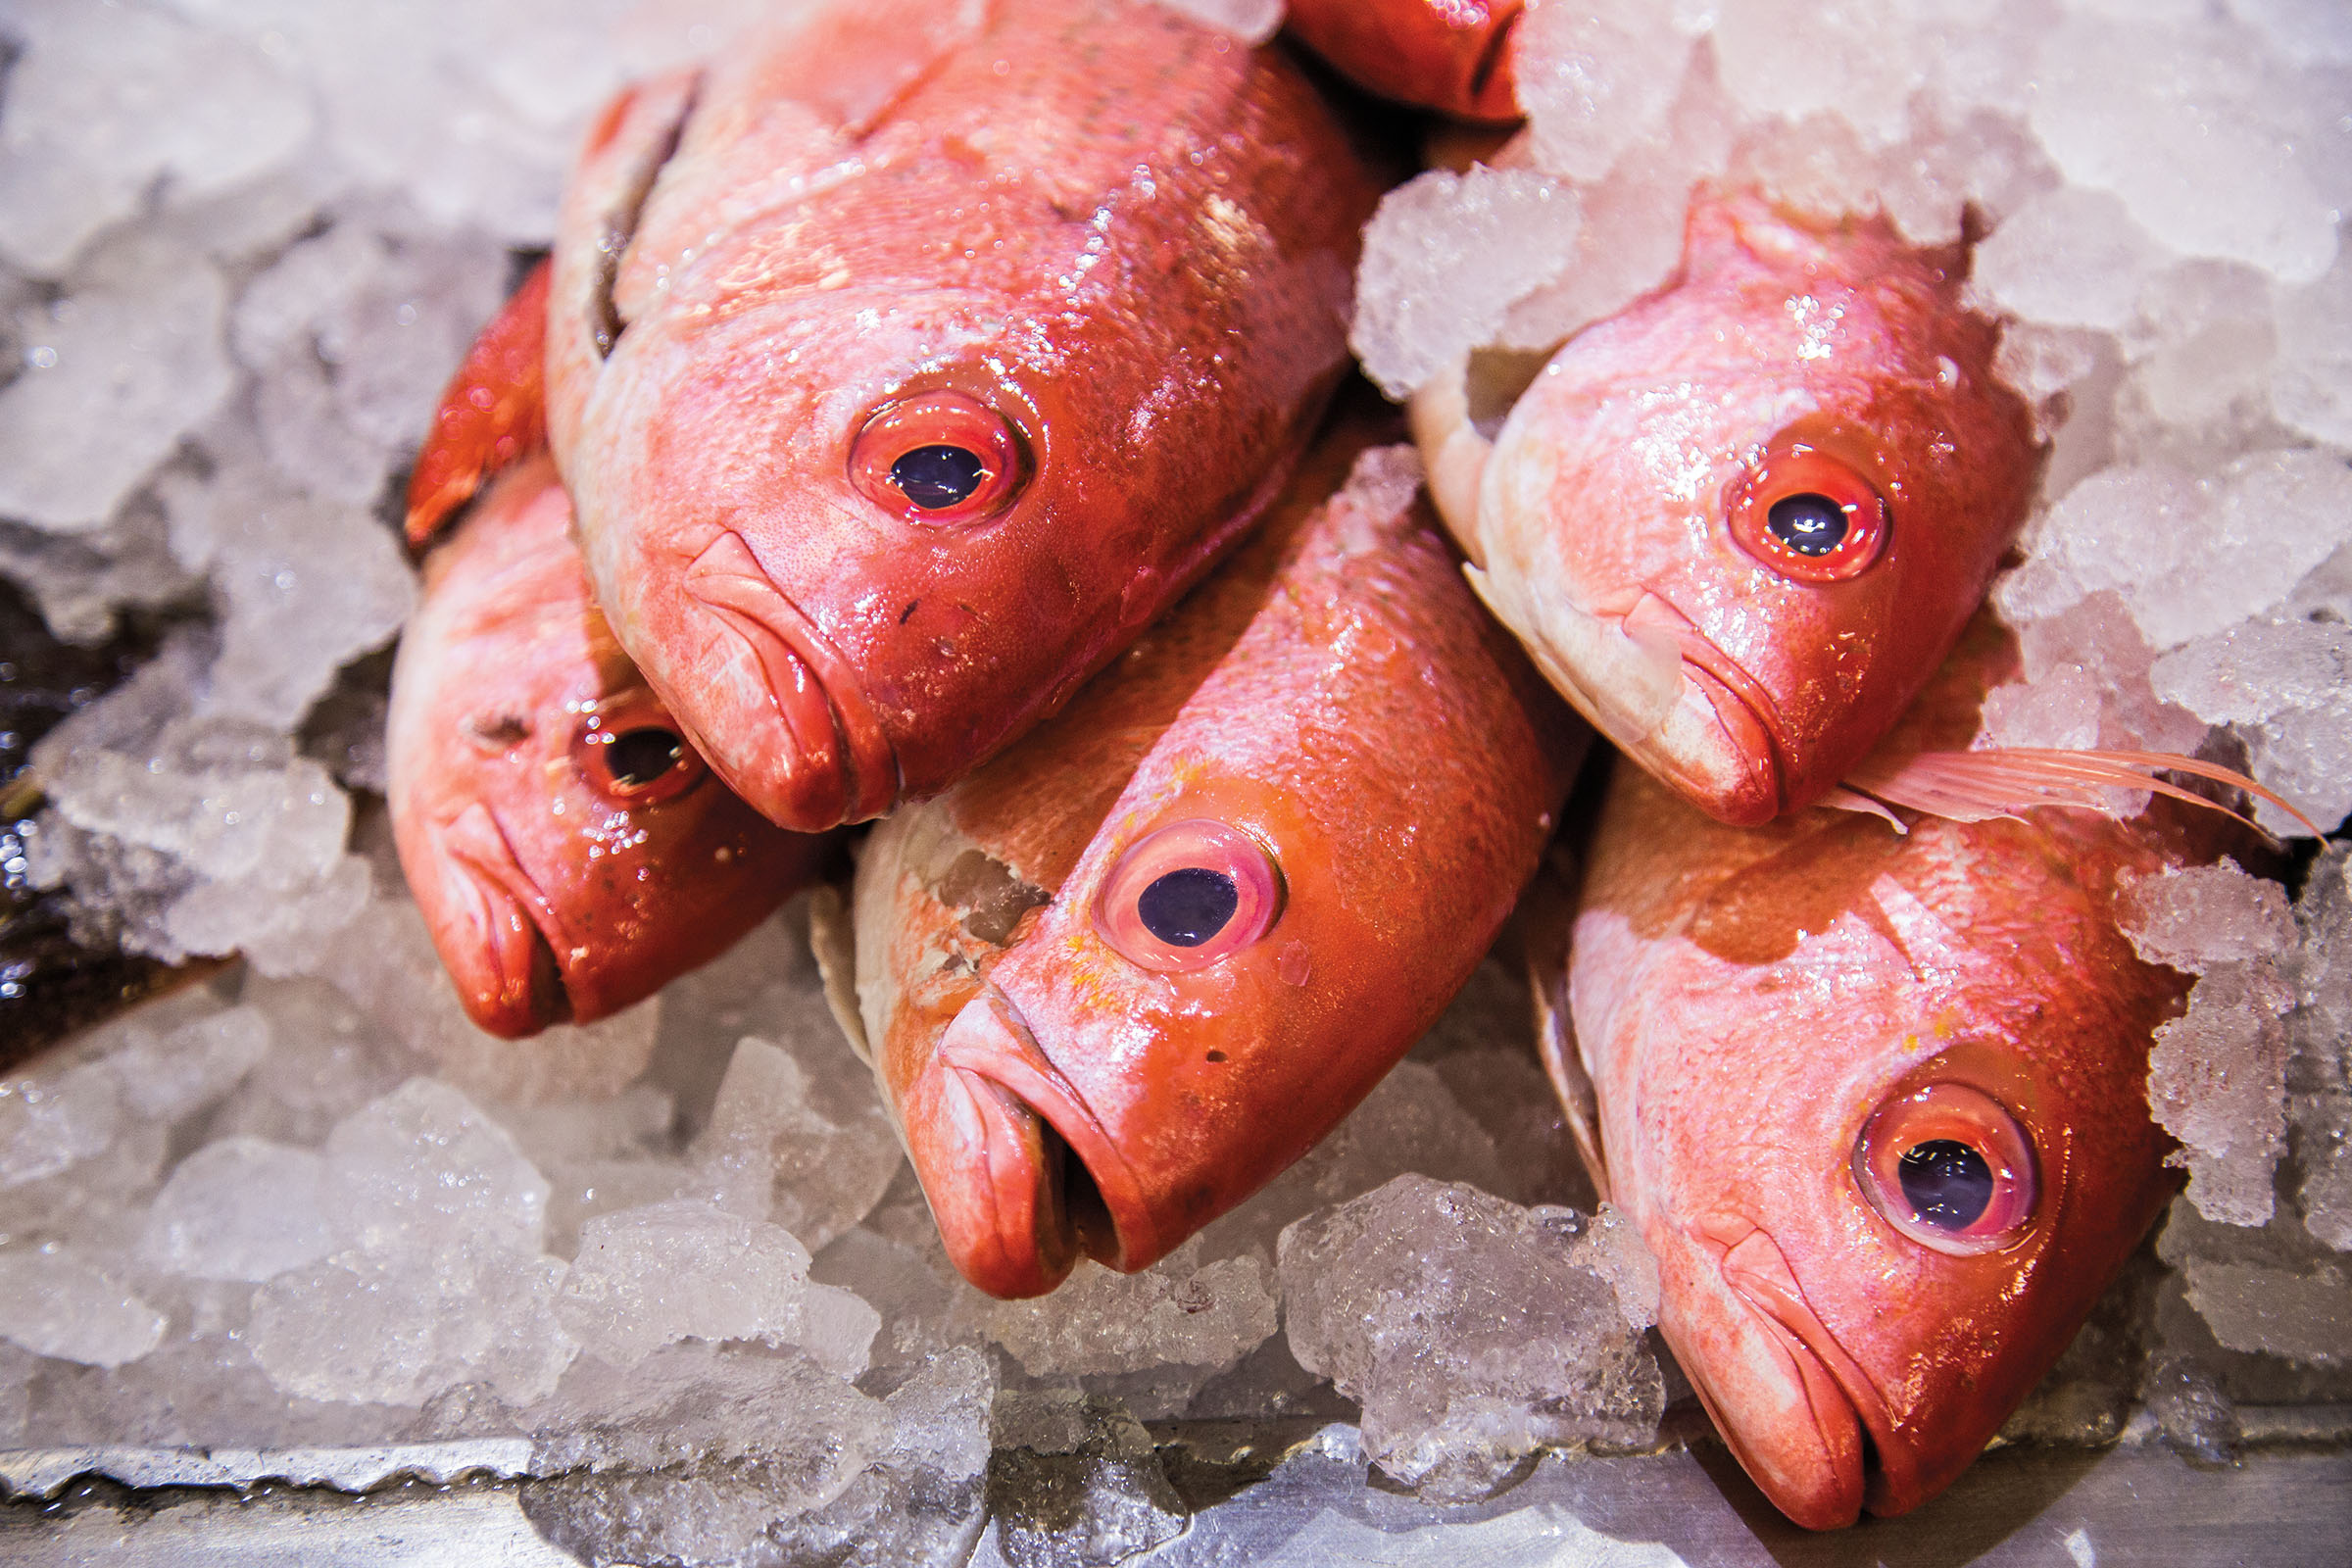 Red fish heads sit on ice